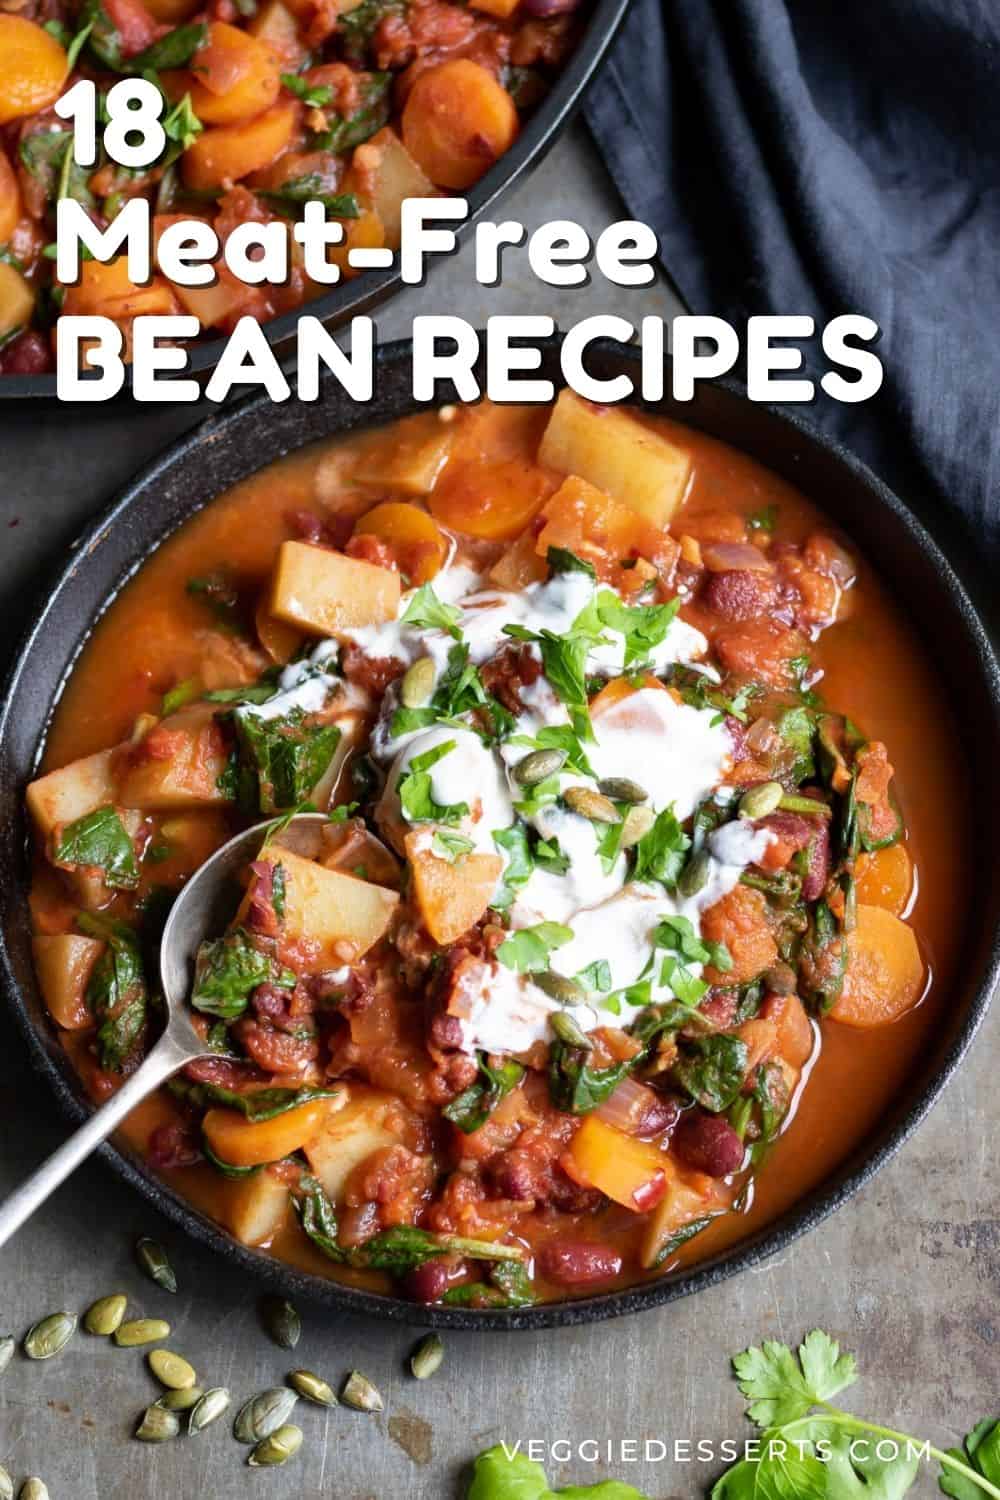 Spoon in a serving dish of stew, with text: 18 Meat Free Bean Recipes.